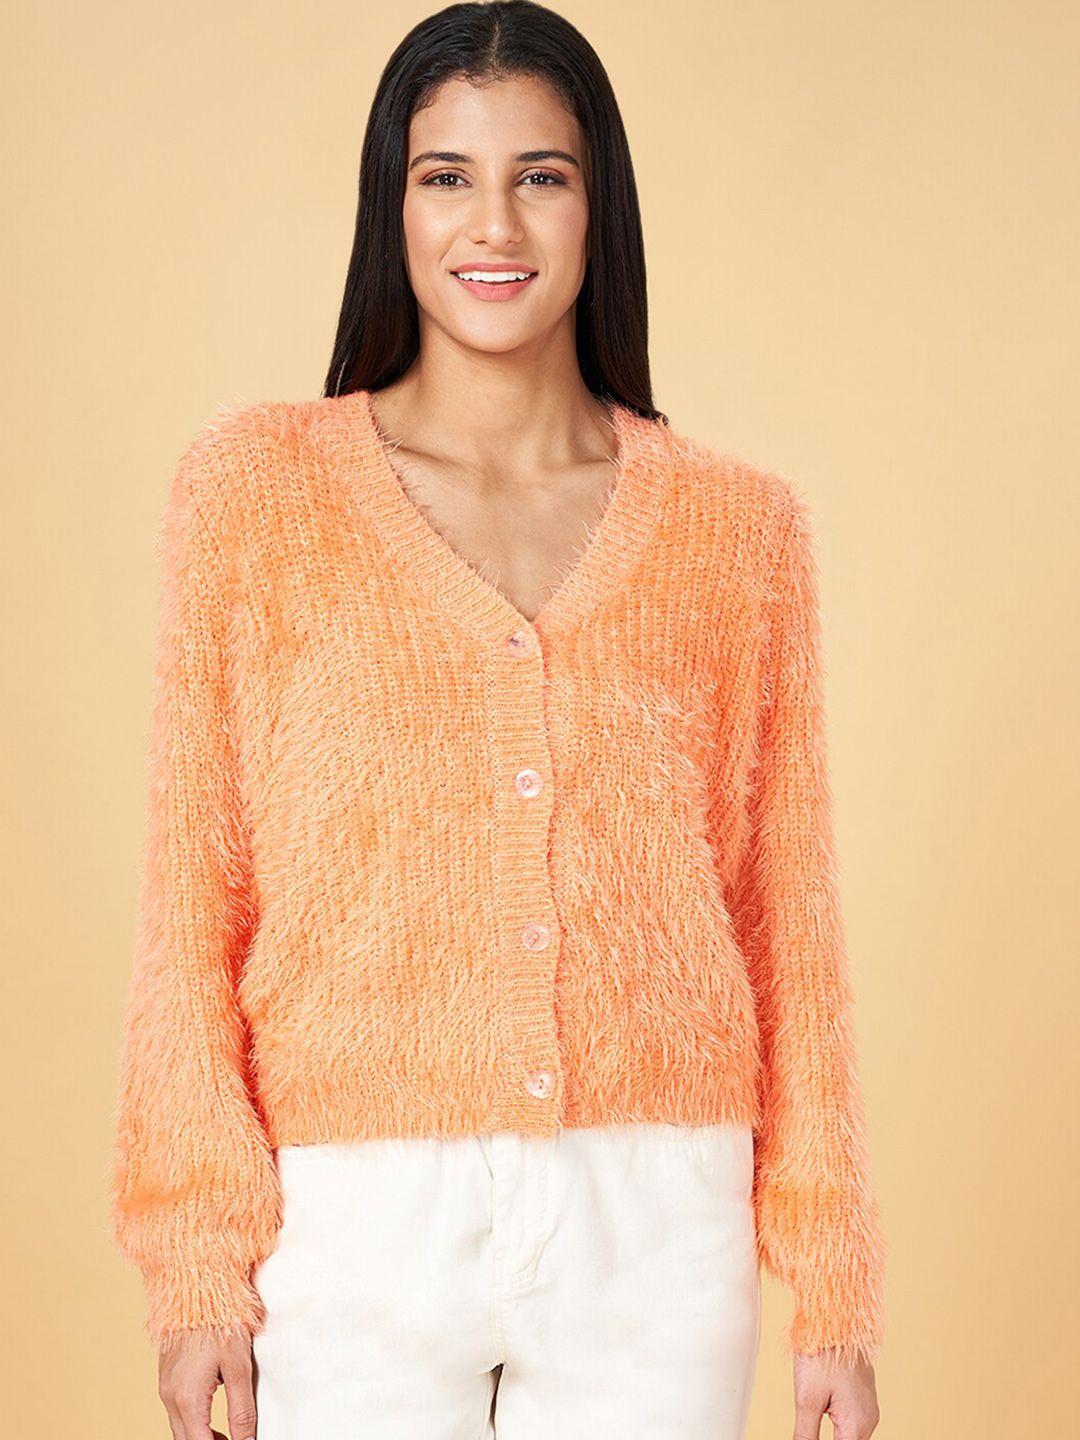 honey by pantaloons women cable knit cardigan